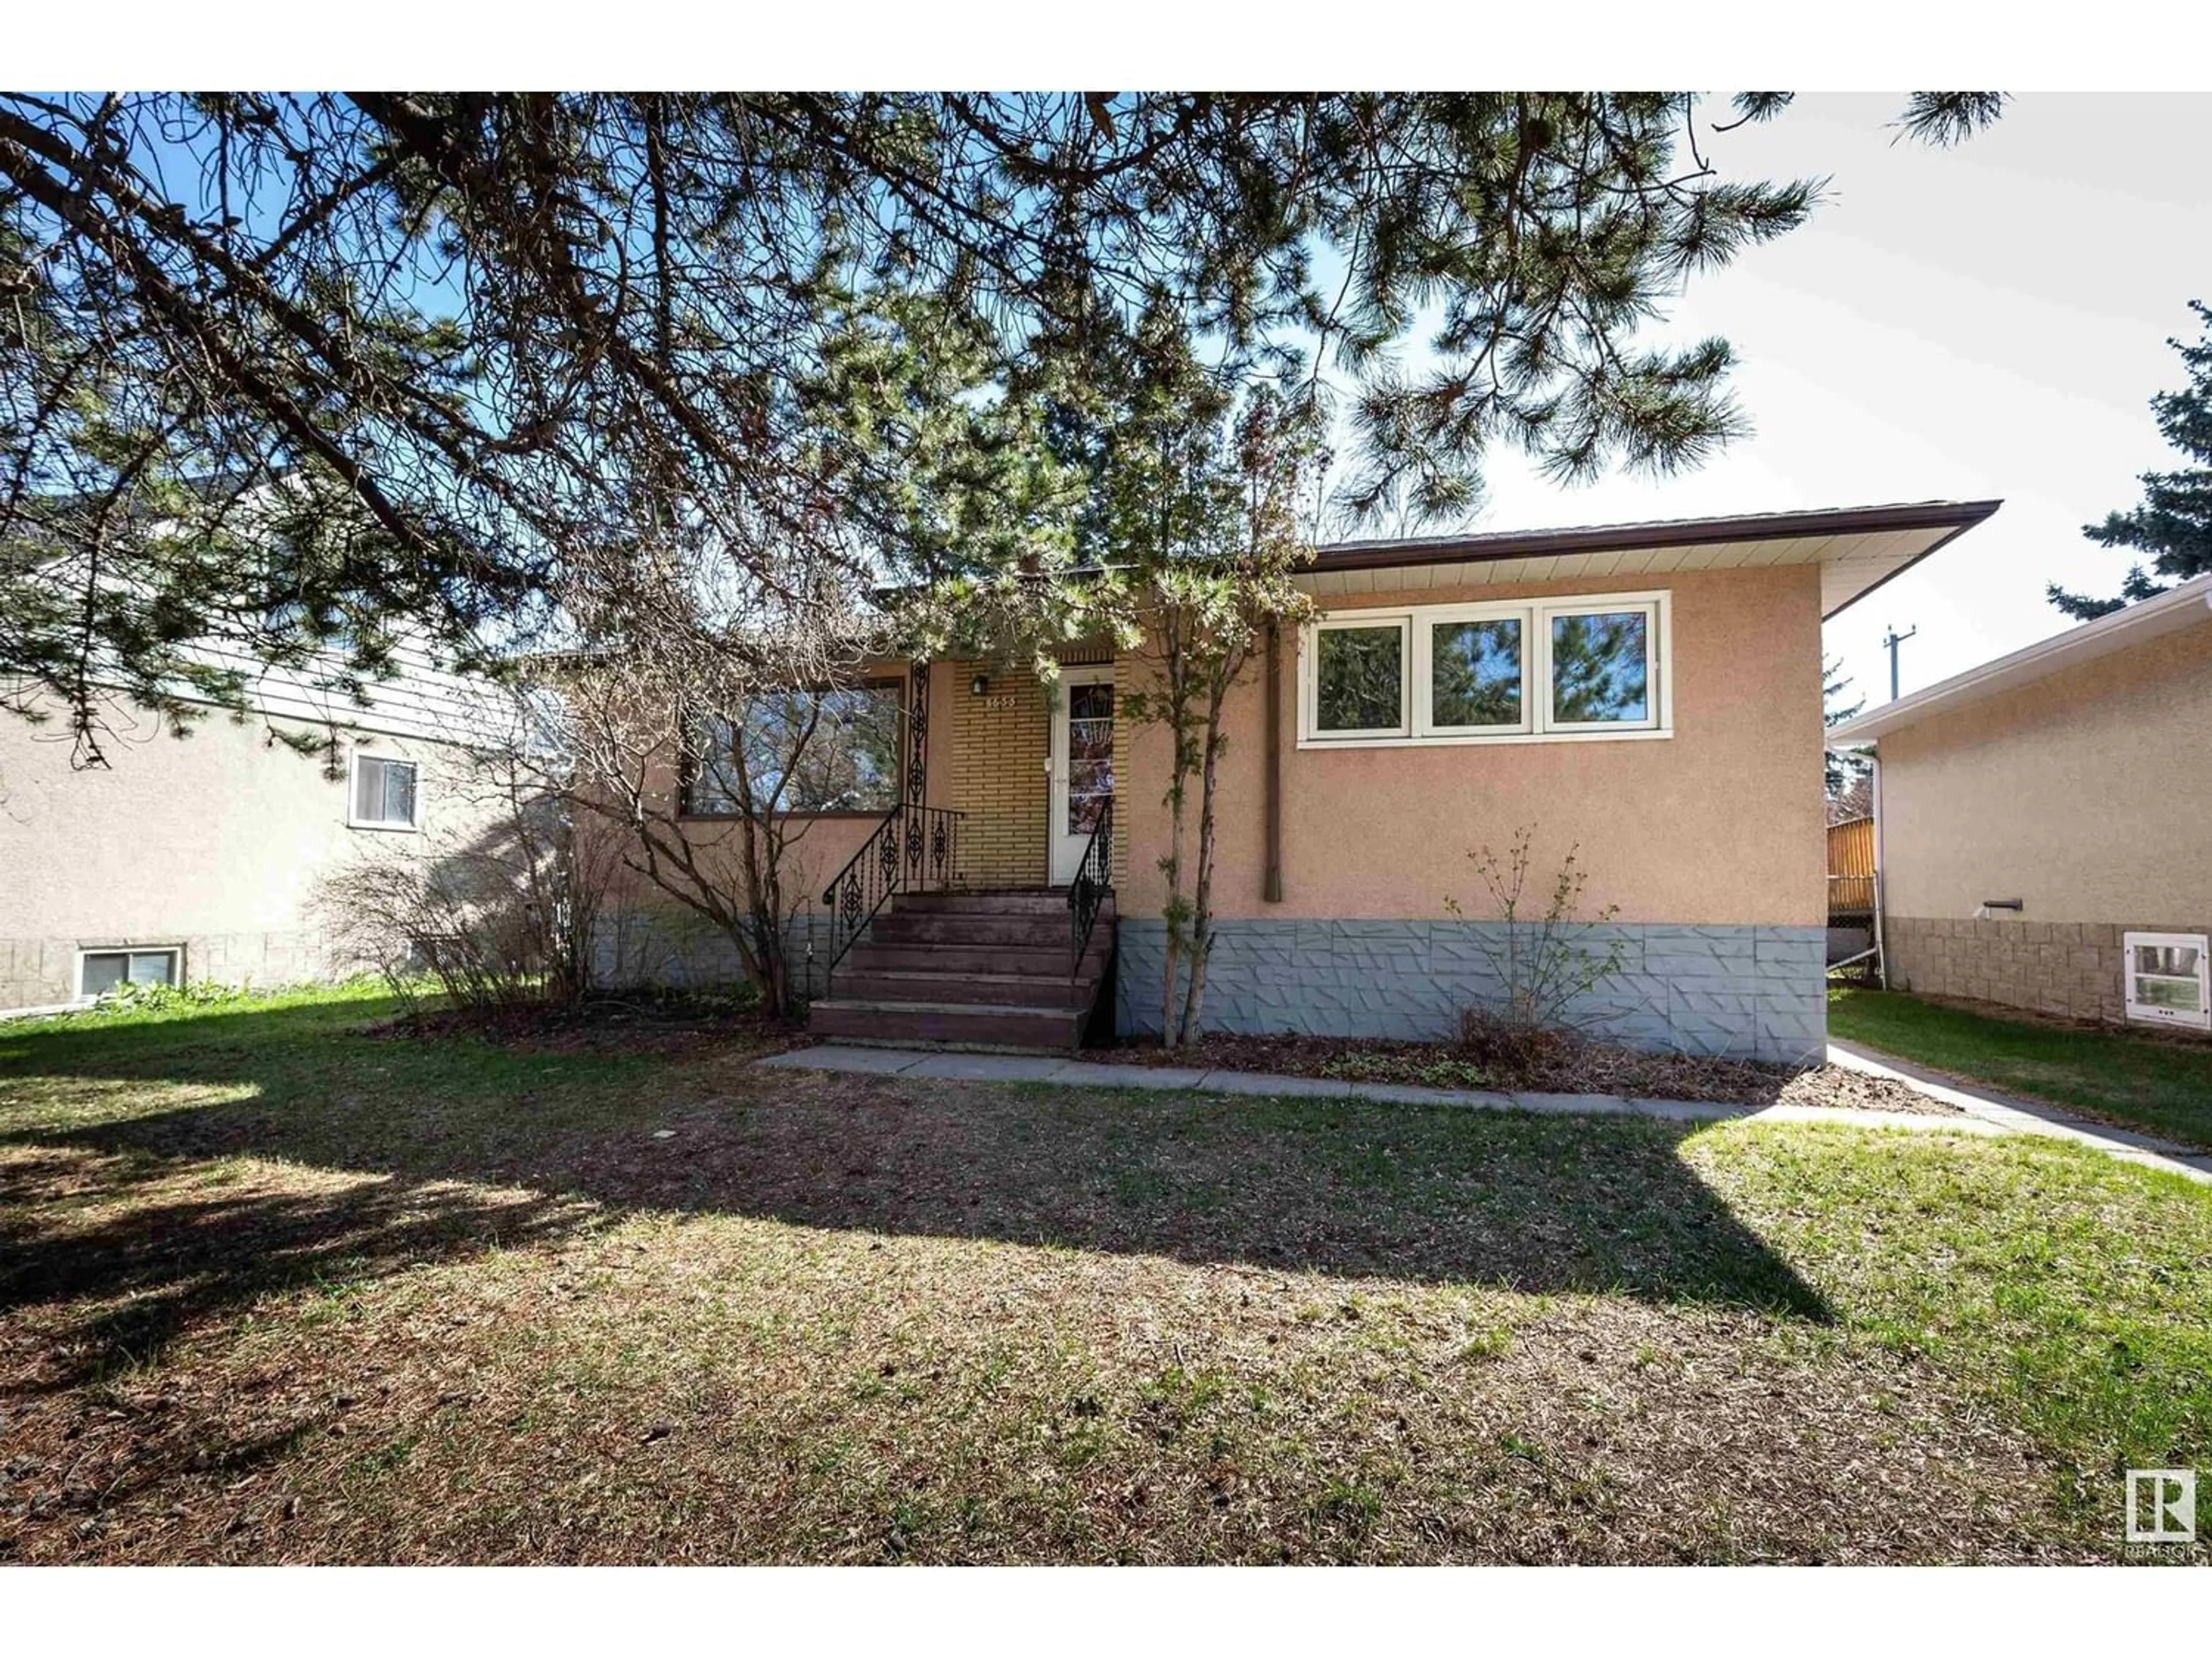 Frontside or backside of a home for 8635 76 ST NW, Edmonton Alberta T6C2K1